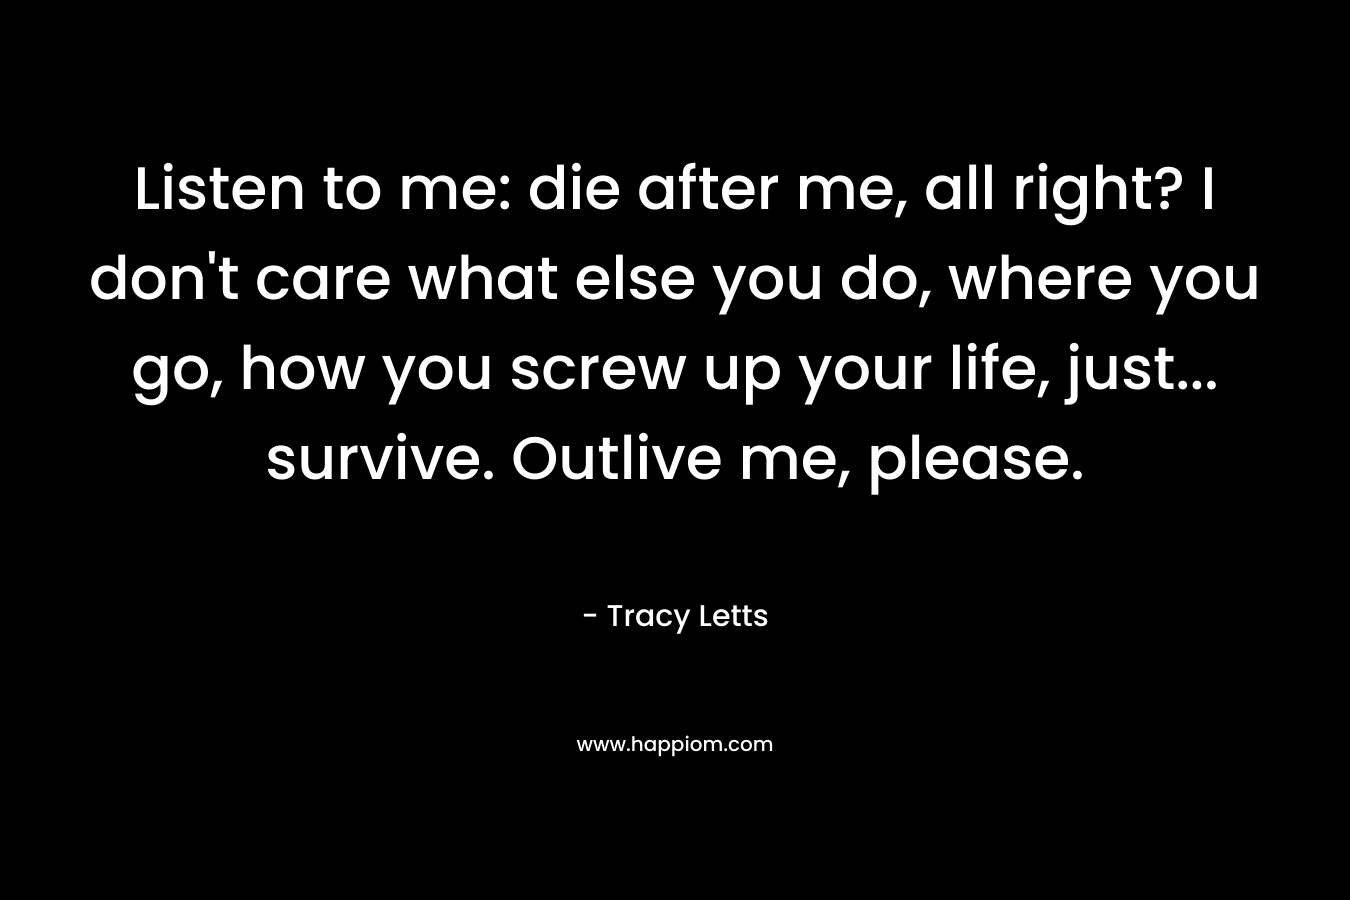 Listen to me: die after me, all right? I don’t care what else you do, where you go, how you screw up your life, just… survive. Outlive me, please. – Tracy Letts